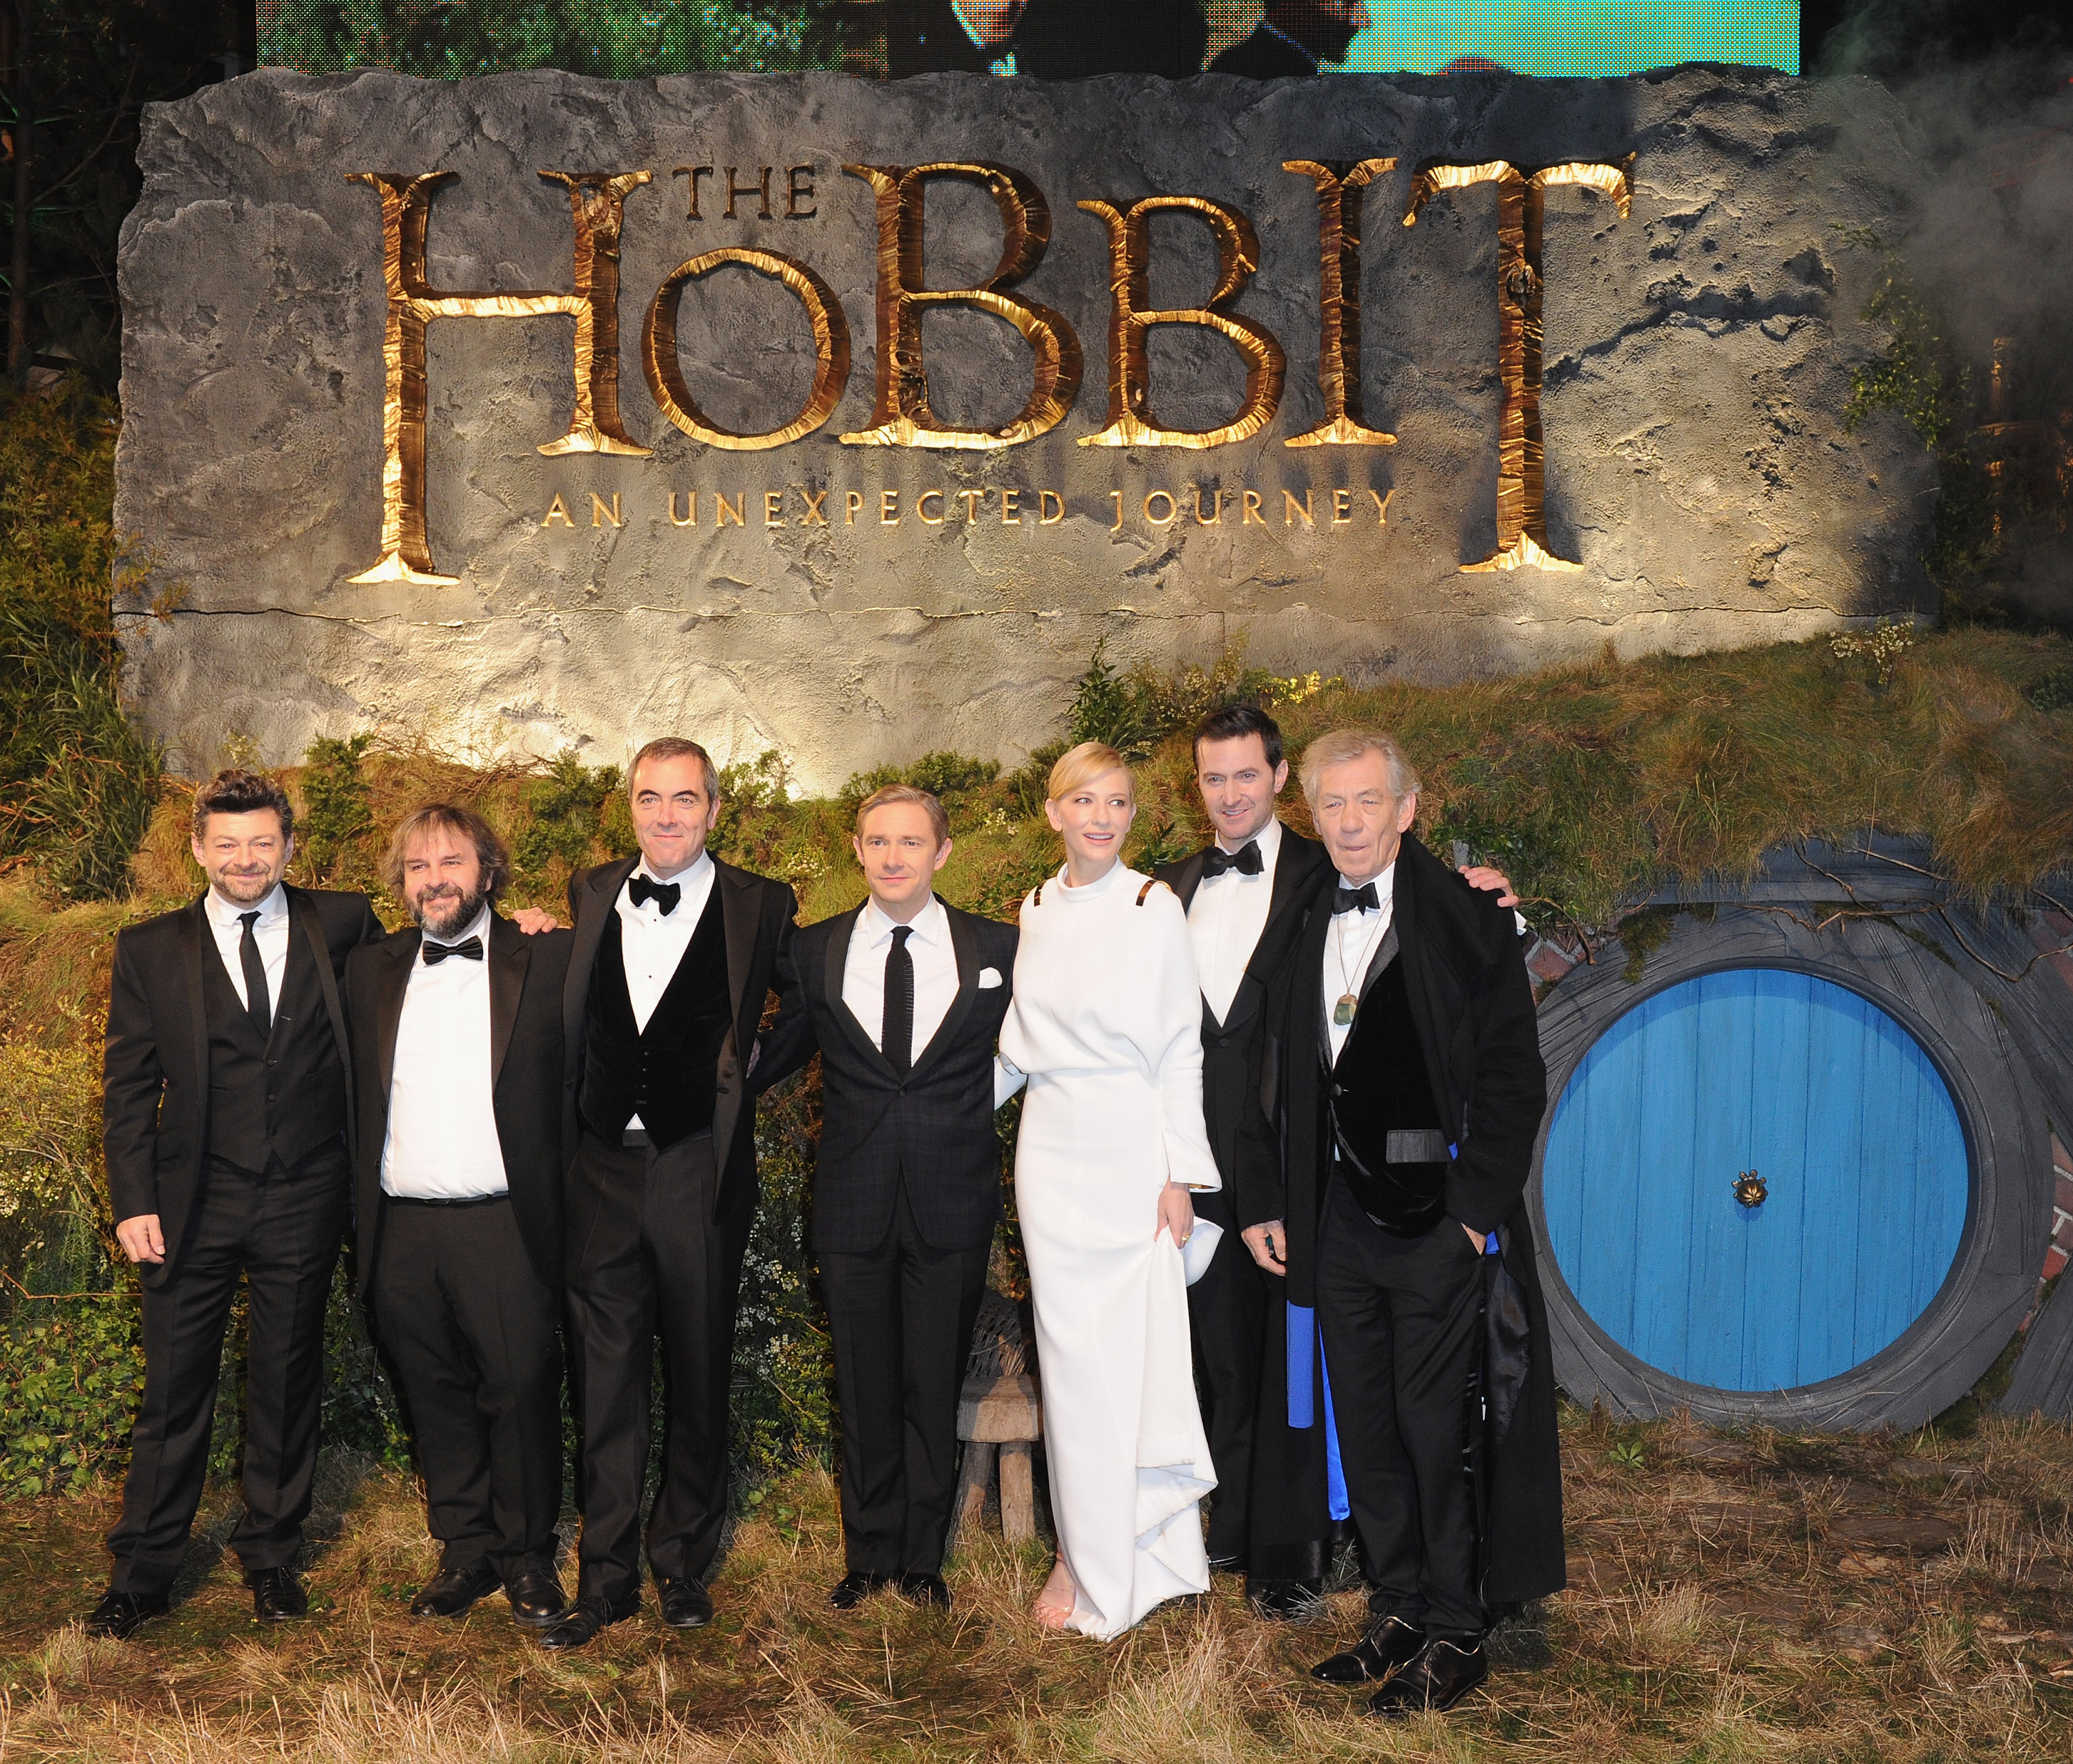 the hobbit an unexpected journey itaril